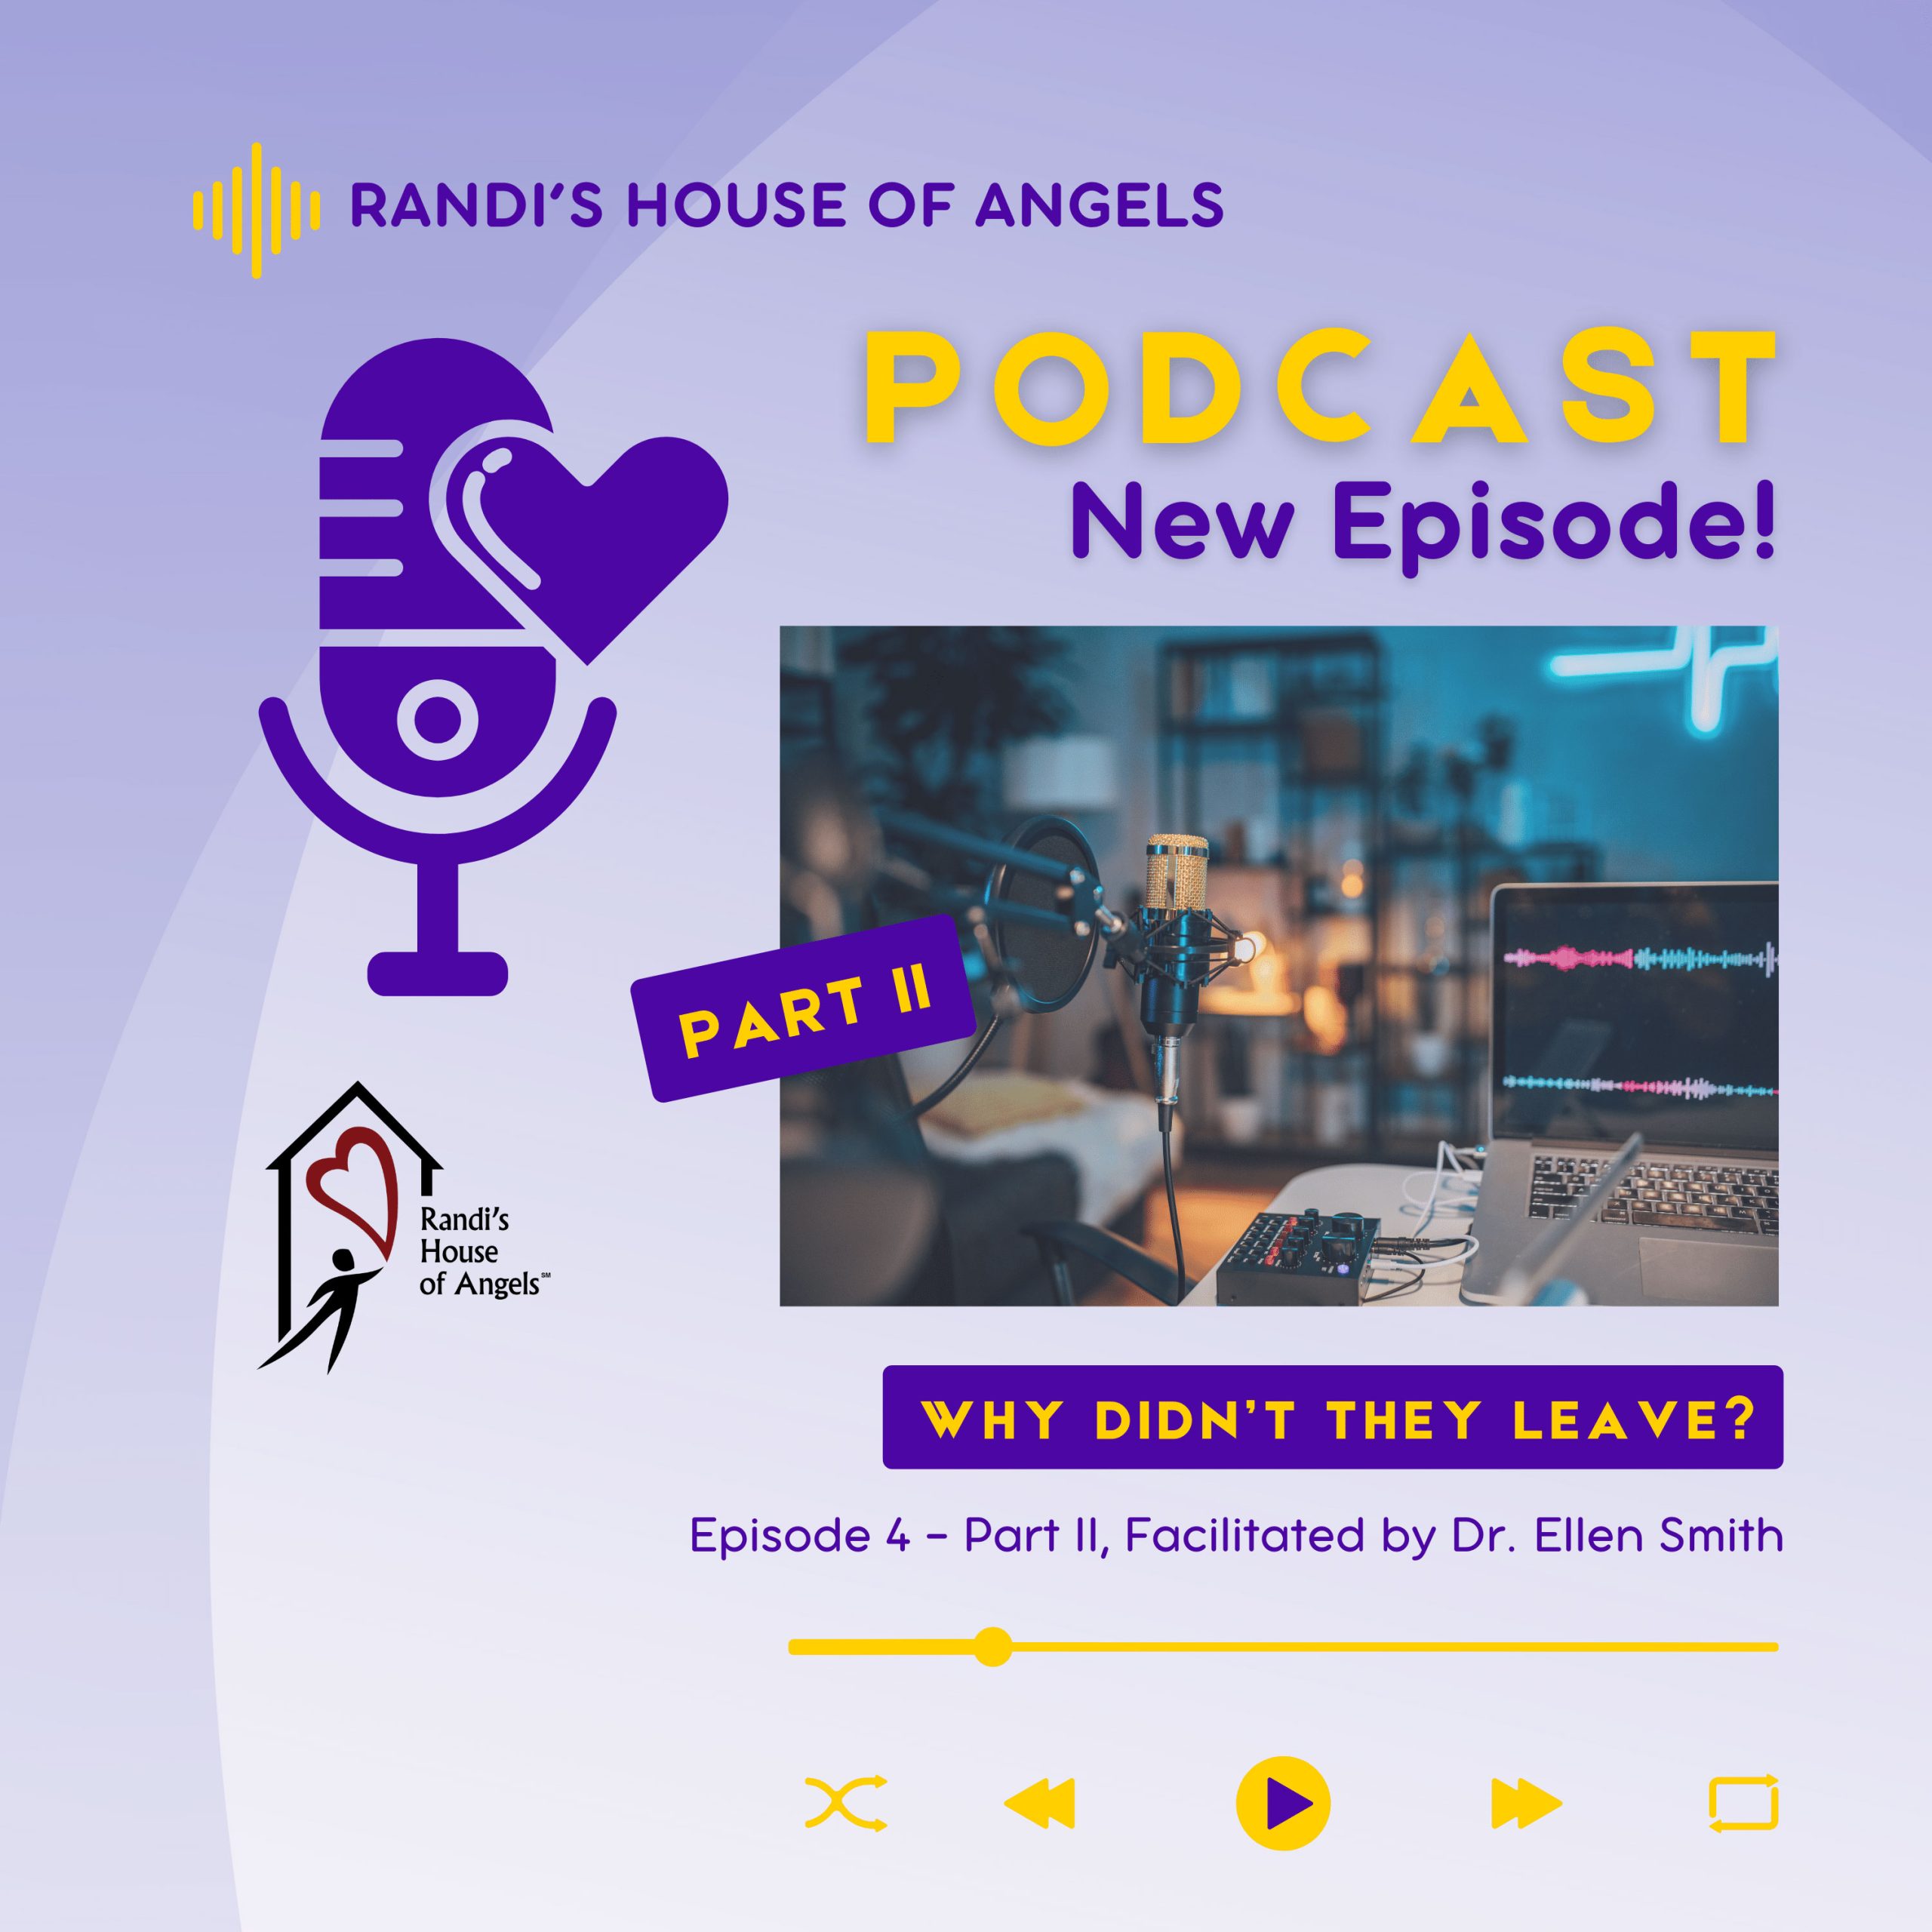 Randi's House of Angels (RHOA) Podcast Episode 4 - Exploring the reasons why people stay in unhealthy relationships - Part 2 - cover art